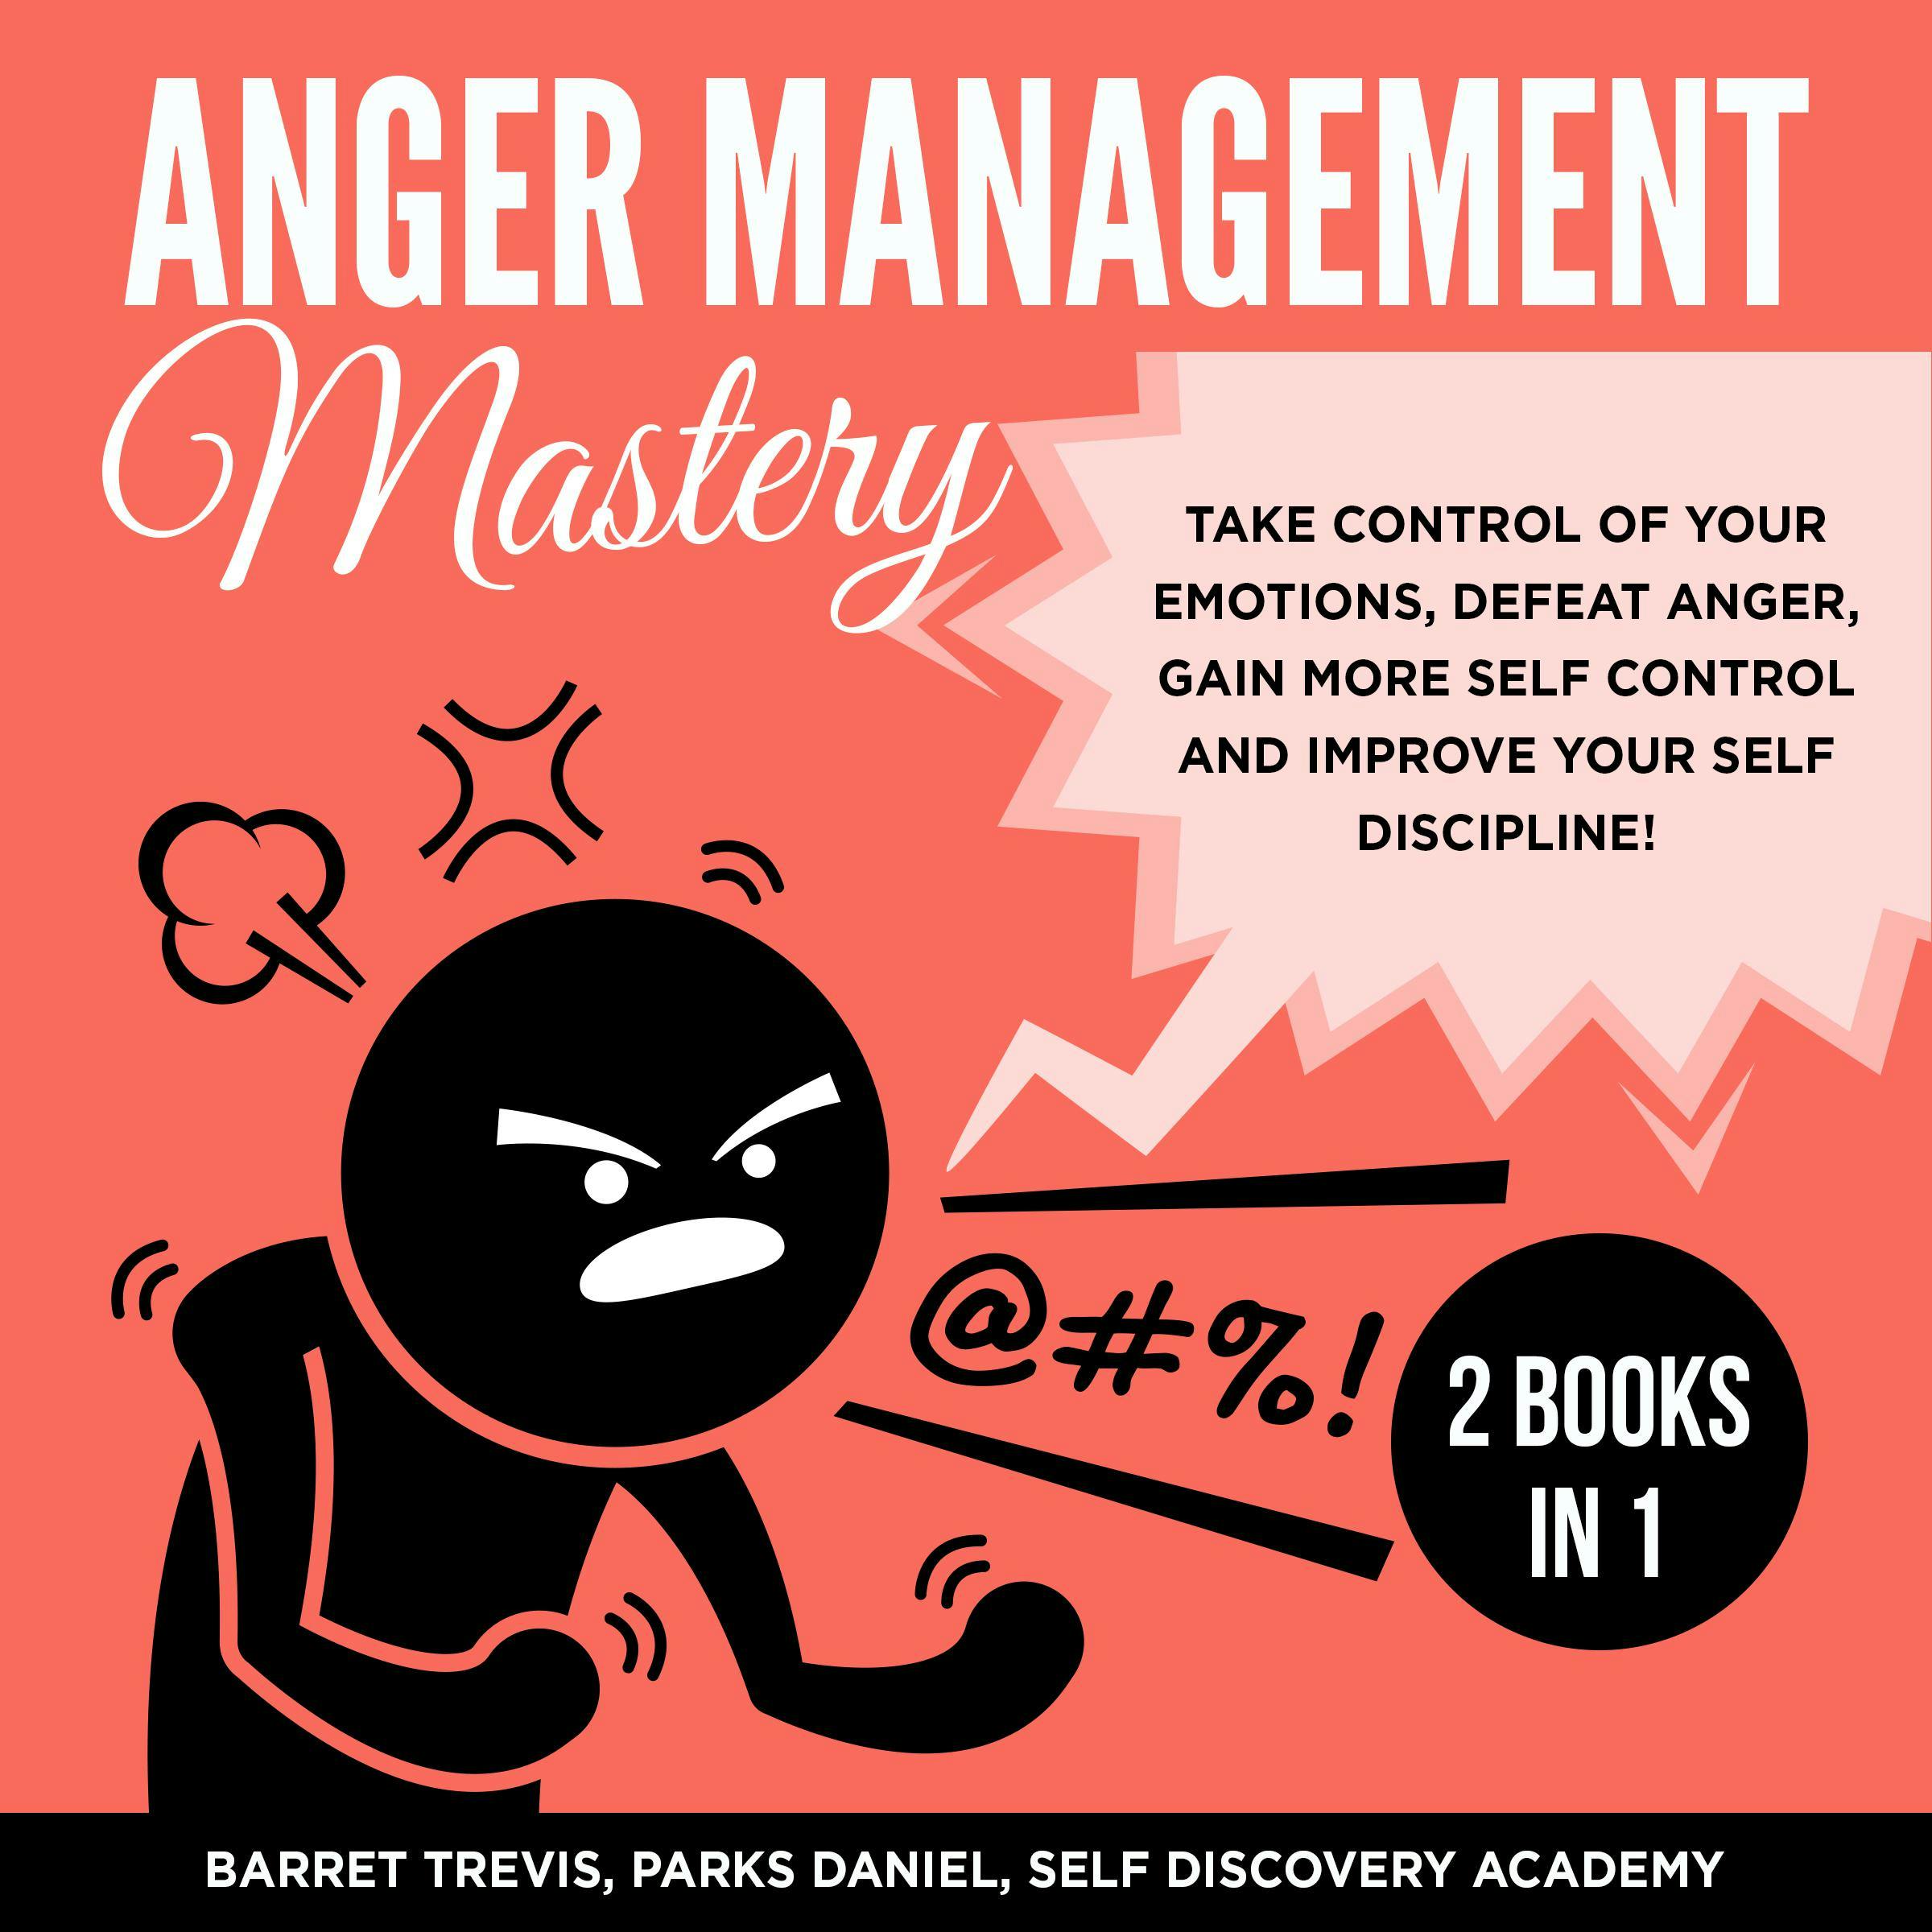 Anger Management Mastery 2 Books in 1: take control of your Emotions, defeat Anger, gain more Self Control and improve your Self Discipline! - Self Discovery Academy, Parks Daniel, Barret Trevis